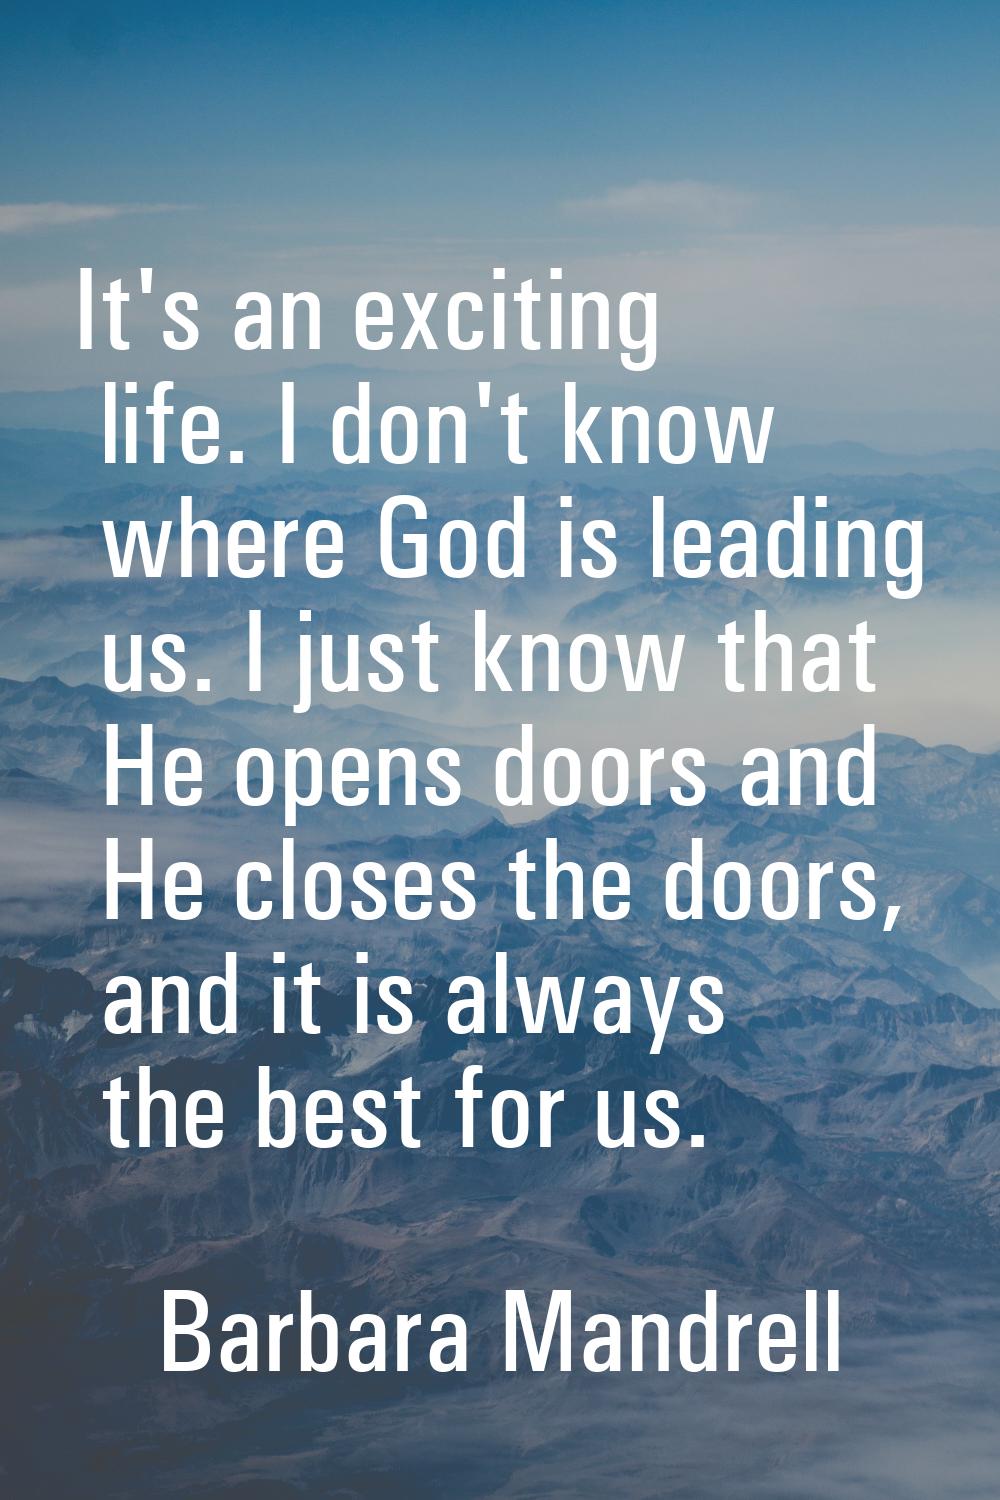 It's an exciting life. I don't know where God is leading us. I just know that He opens doors and He